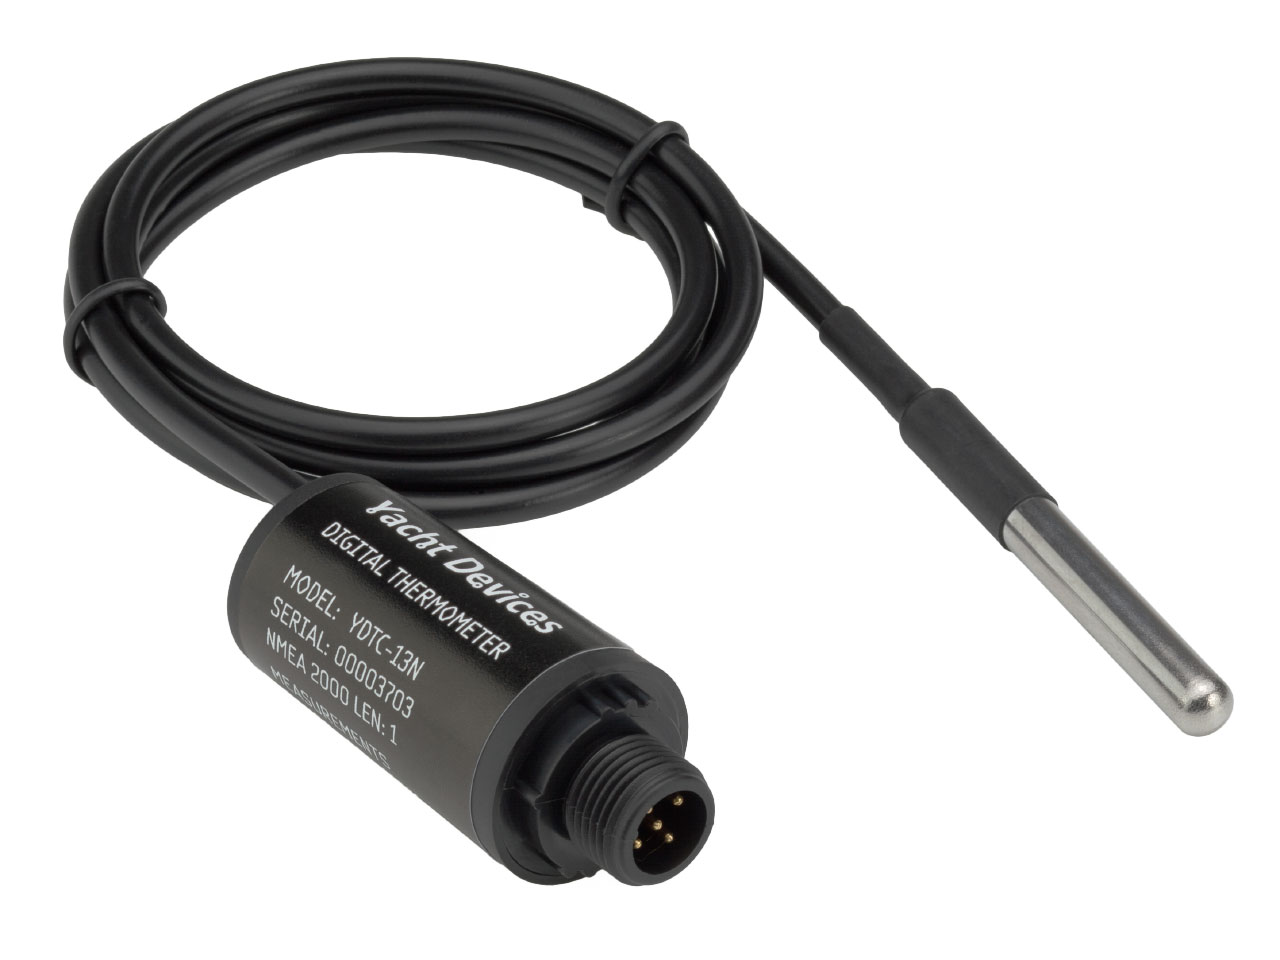 YDTC-13N model, with NMEA 2000 Micro Male connector